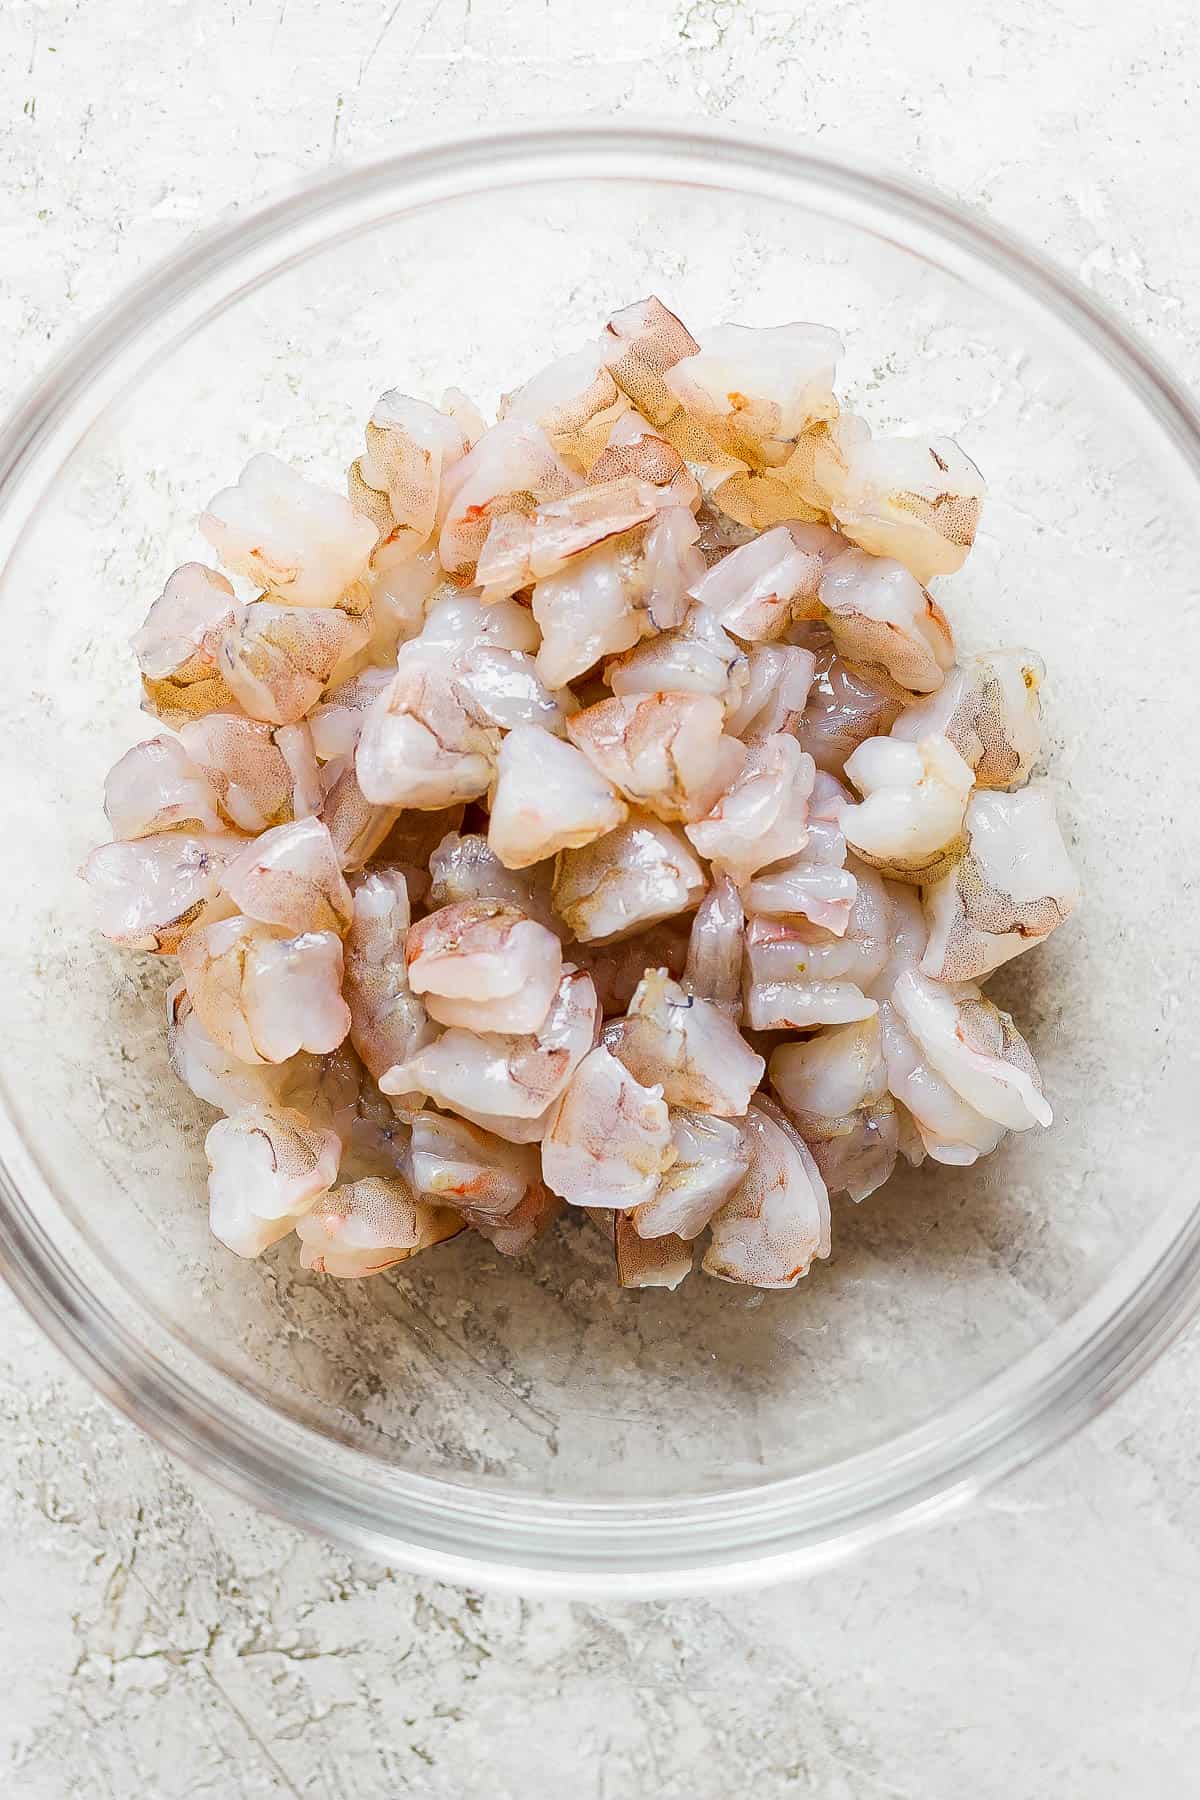 Bite-sized raw shrimp in a bowl for ceviche.